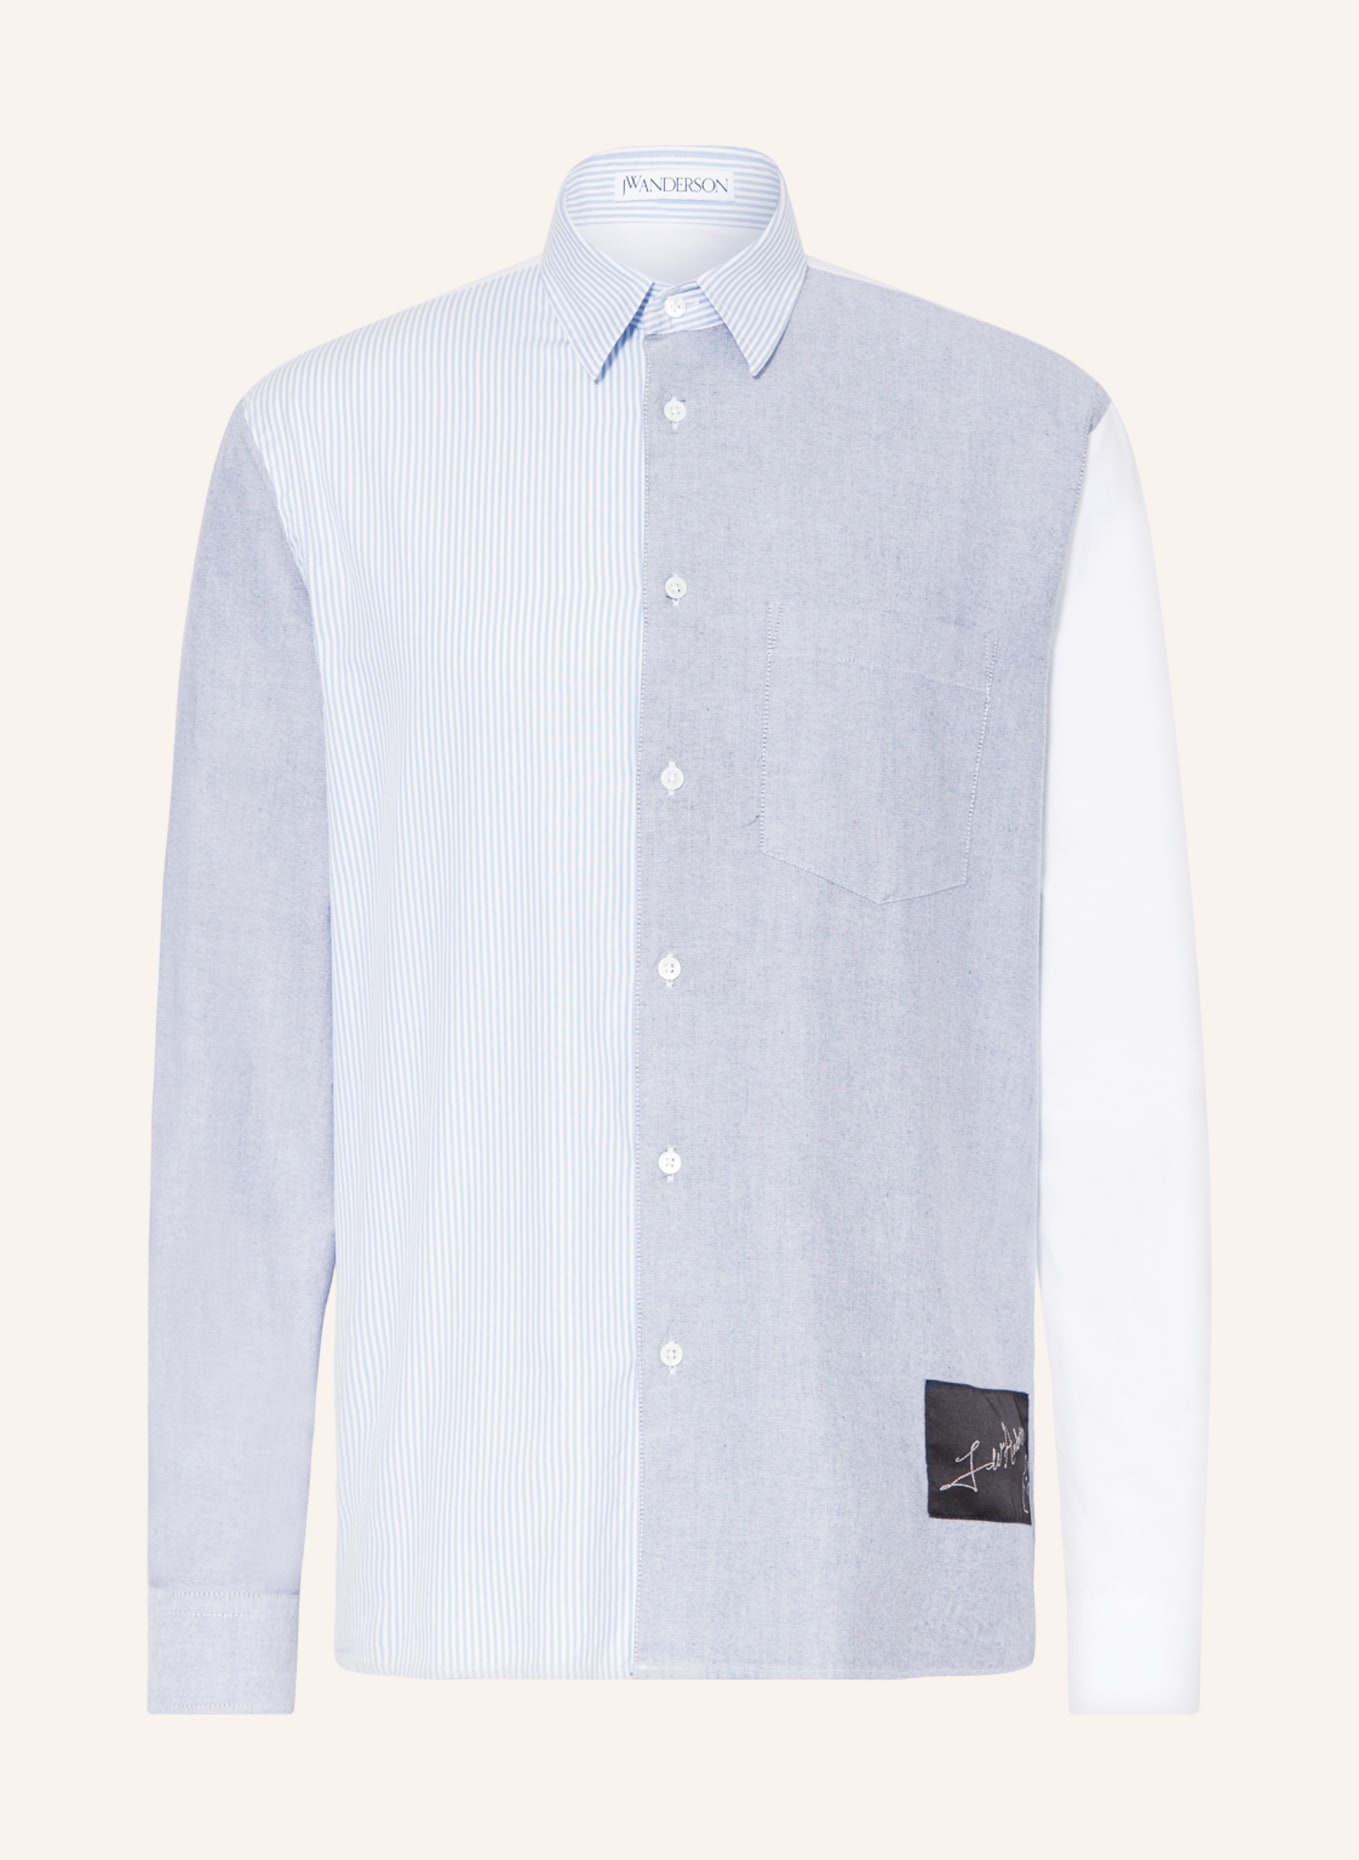 JW ANDERSON Shirt classic fit, Color: LIGHT BLUE/ GRAY/ WHITE (Image 1)